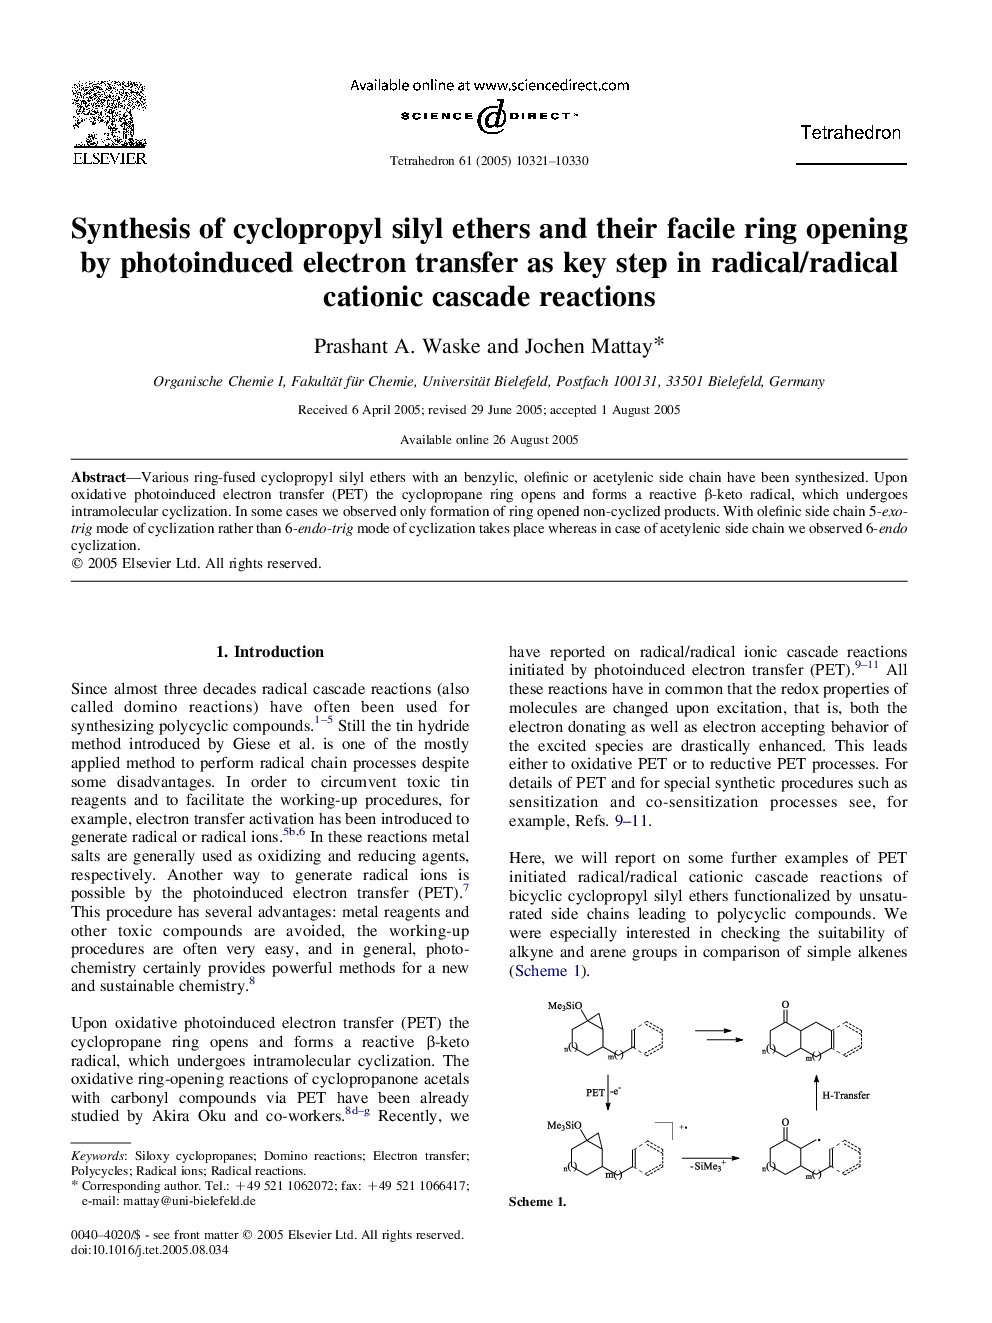 Synthesis of cyclopropyl silyl ethers and their facile ring opening by photoinduced electron transfer as key step in radical/radical cationic cascade reactions